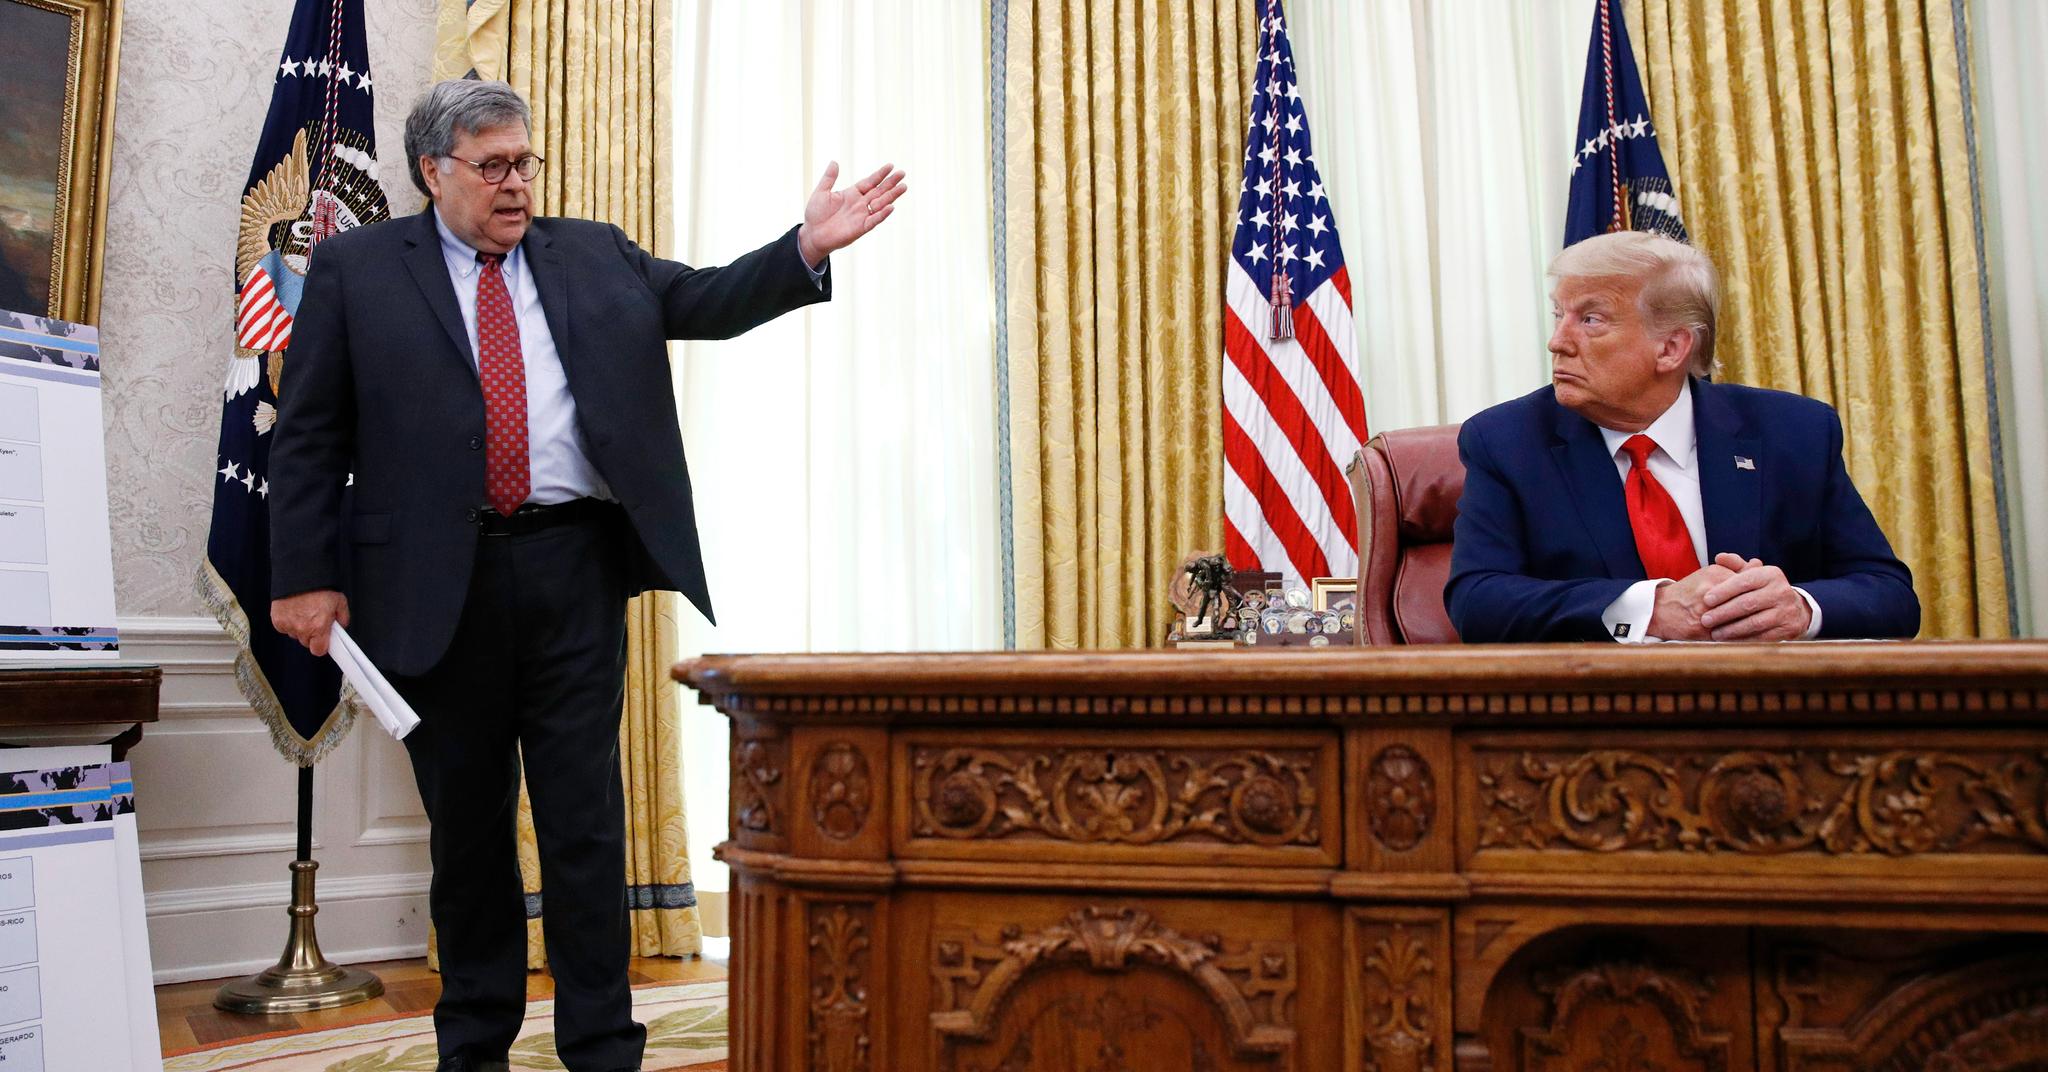 William Barr’s Justified Case: Trump’s Attempted Sabotage of Power Transition After 2020 US Election